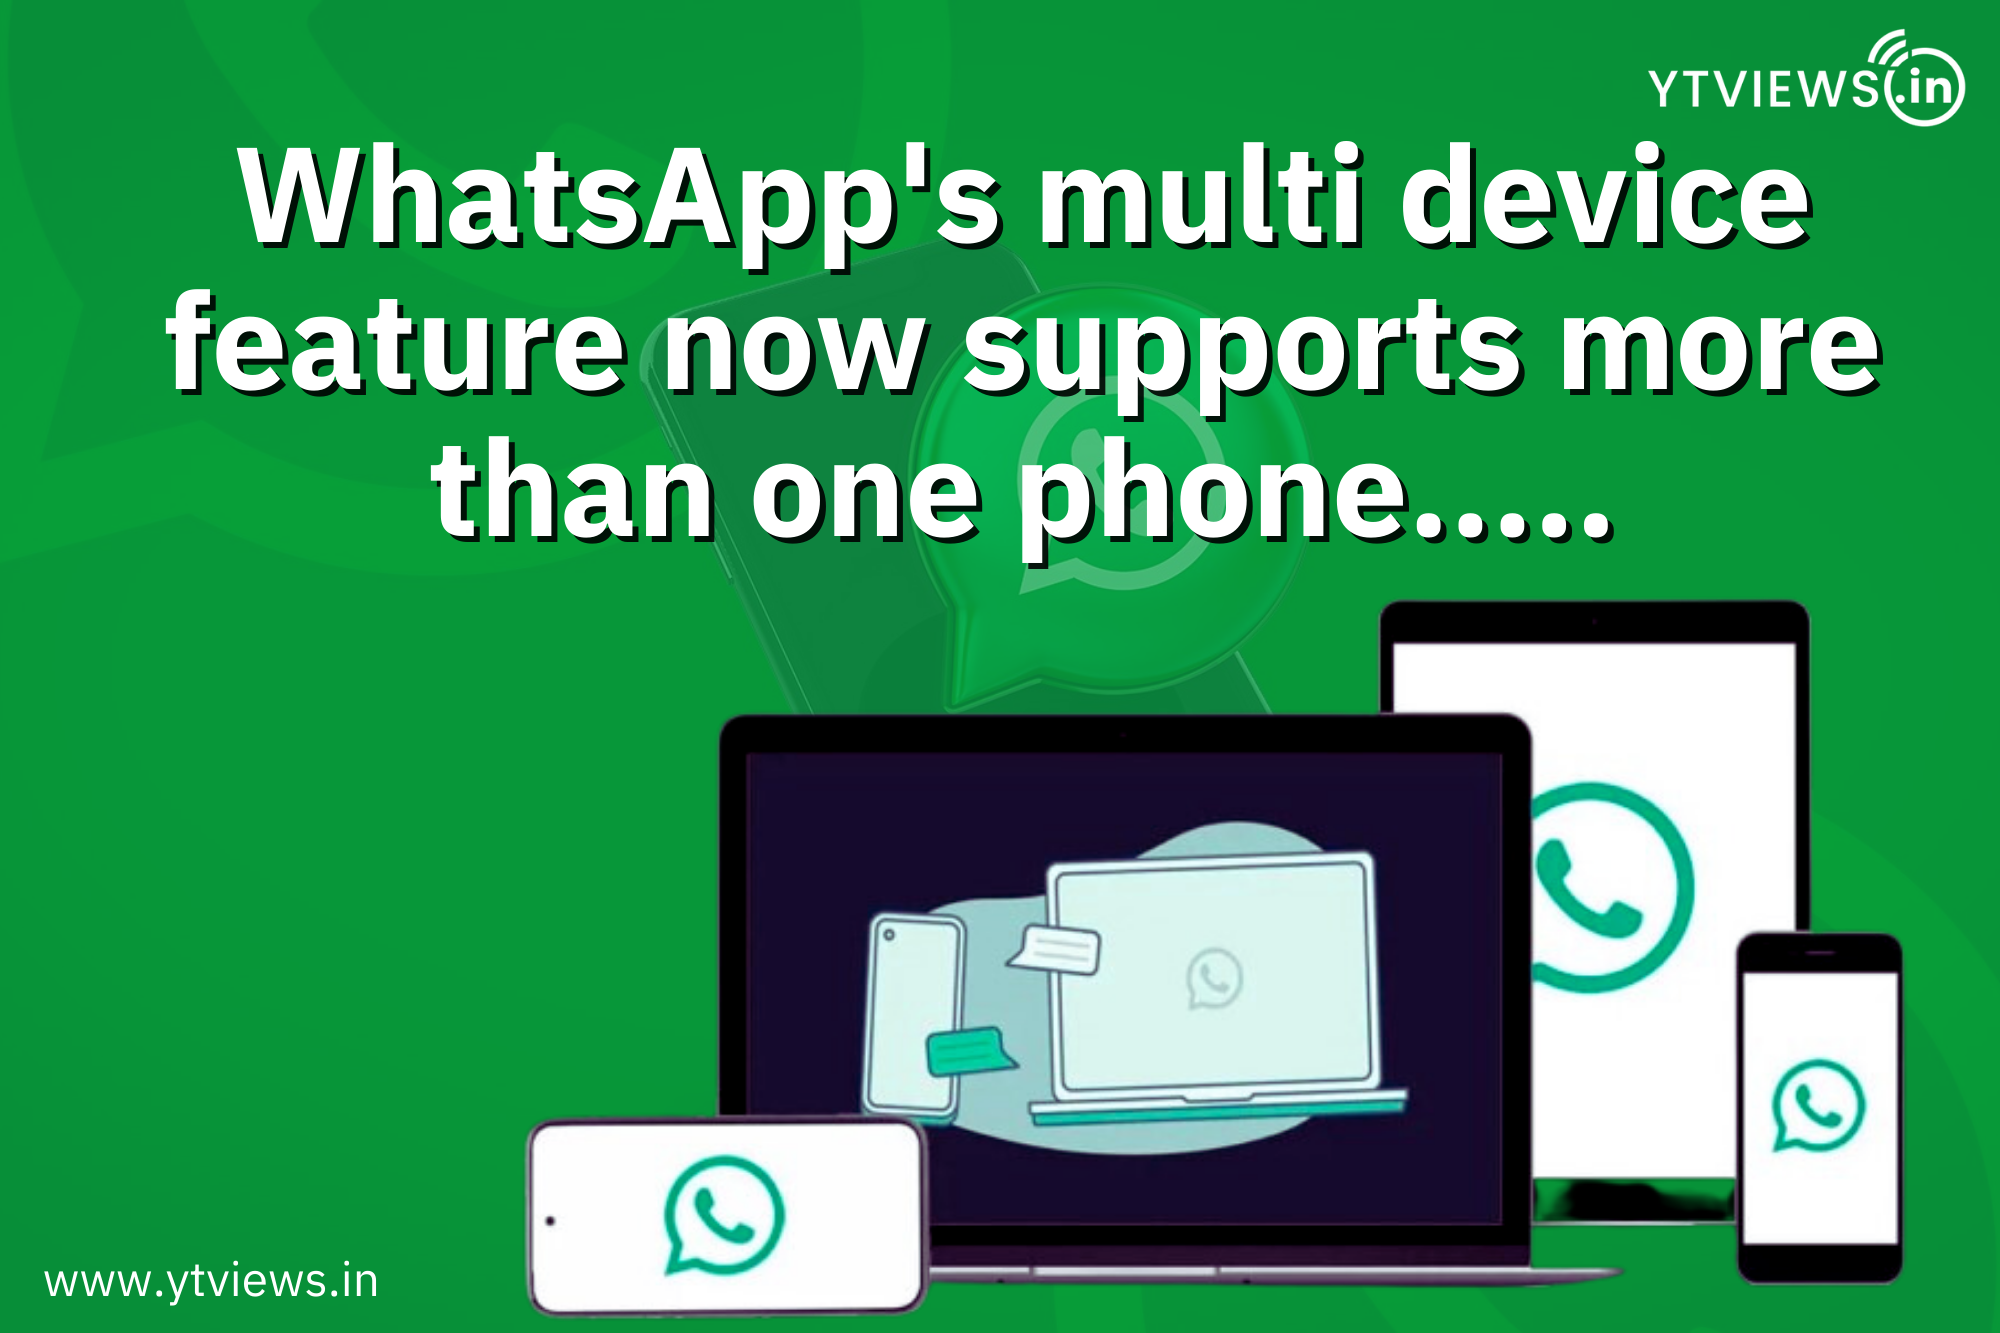 You can now use WhatsApp on more than one phone with its multi-device feature